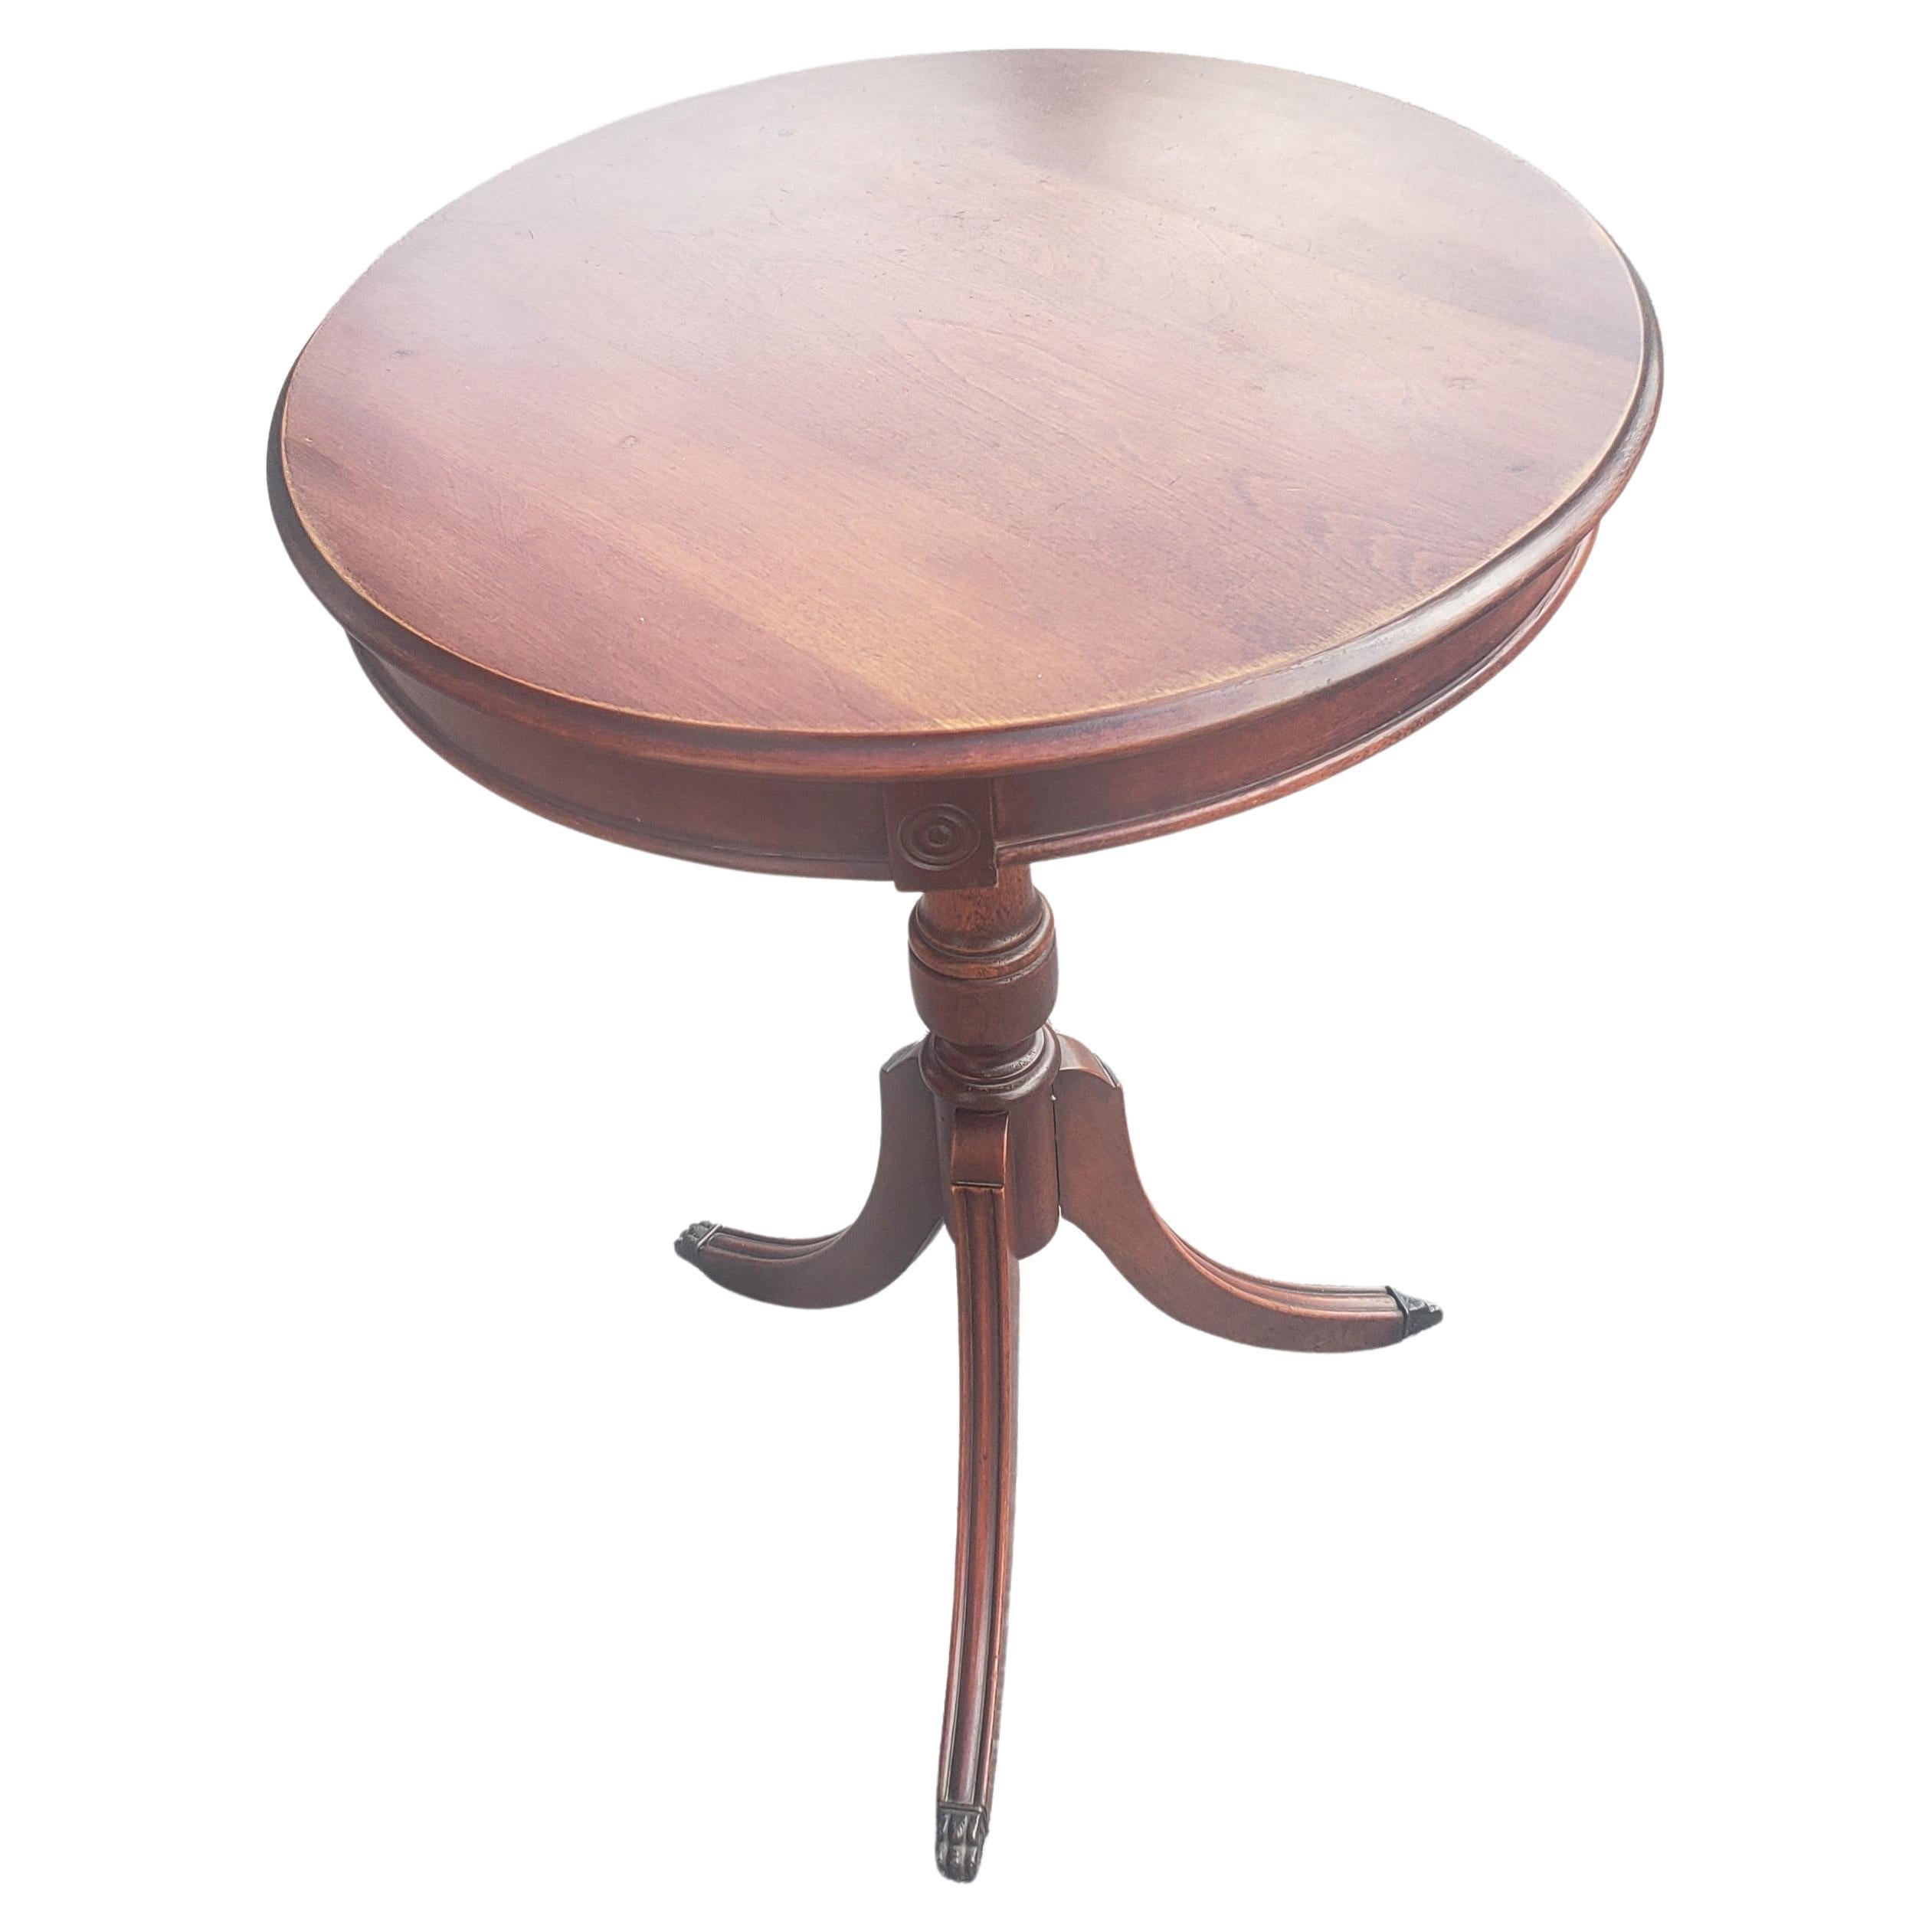 Midcentury Mahogany Pedestal Tripod Drum Side Table with Paw Feet